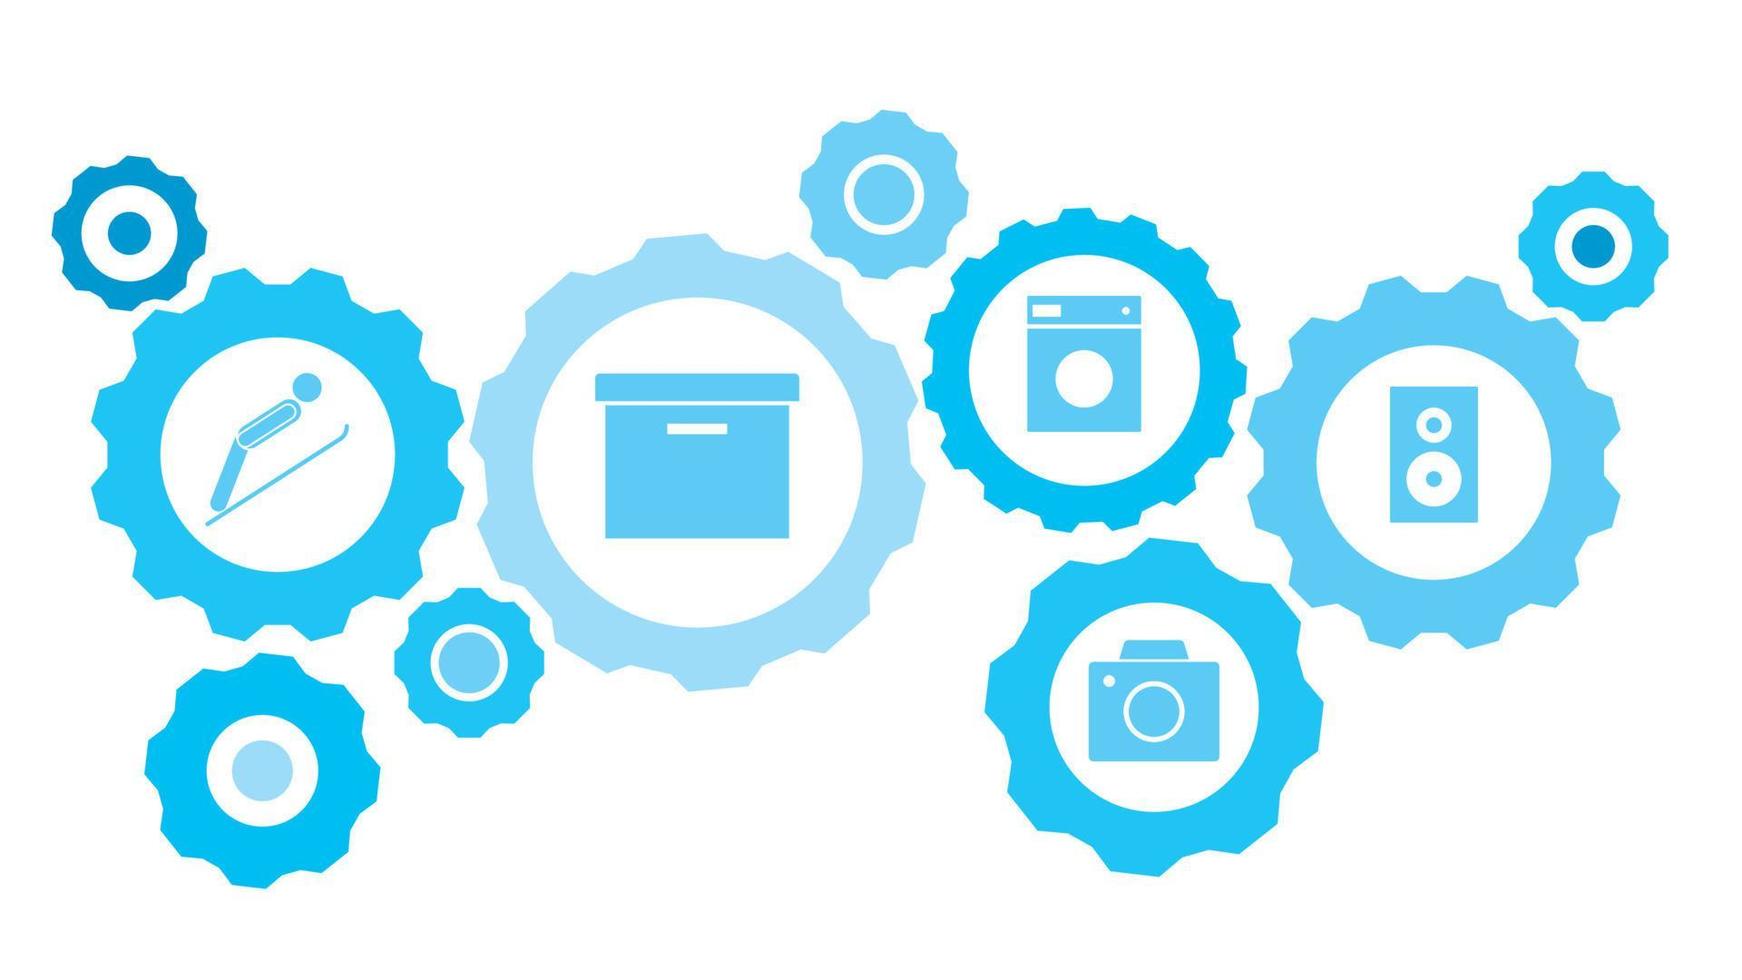 Speaker gear blue icon set. Abstract background with connected gears and icons for logistic, service, shipping, distribution, transport, market, communicate concepts vector